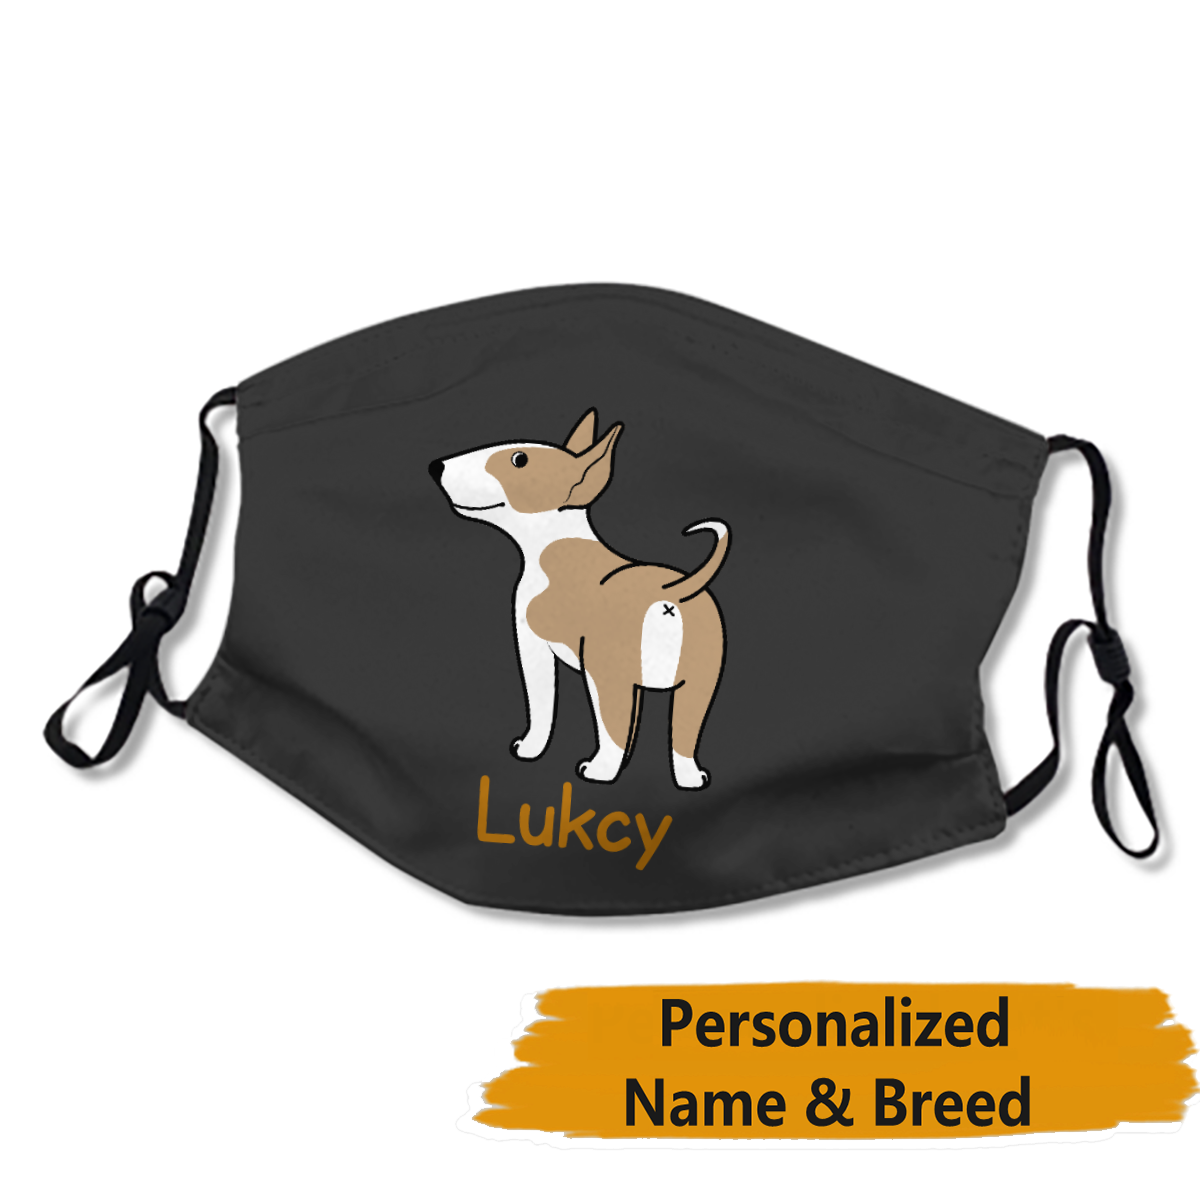 Personalized Dog's Name & Breed Face Mask No.3